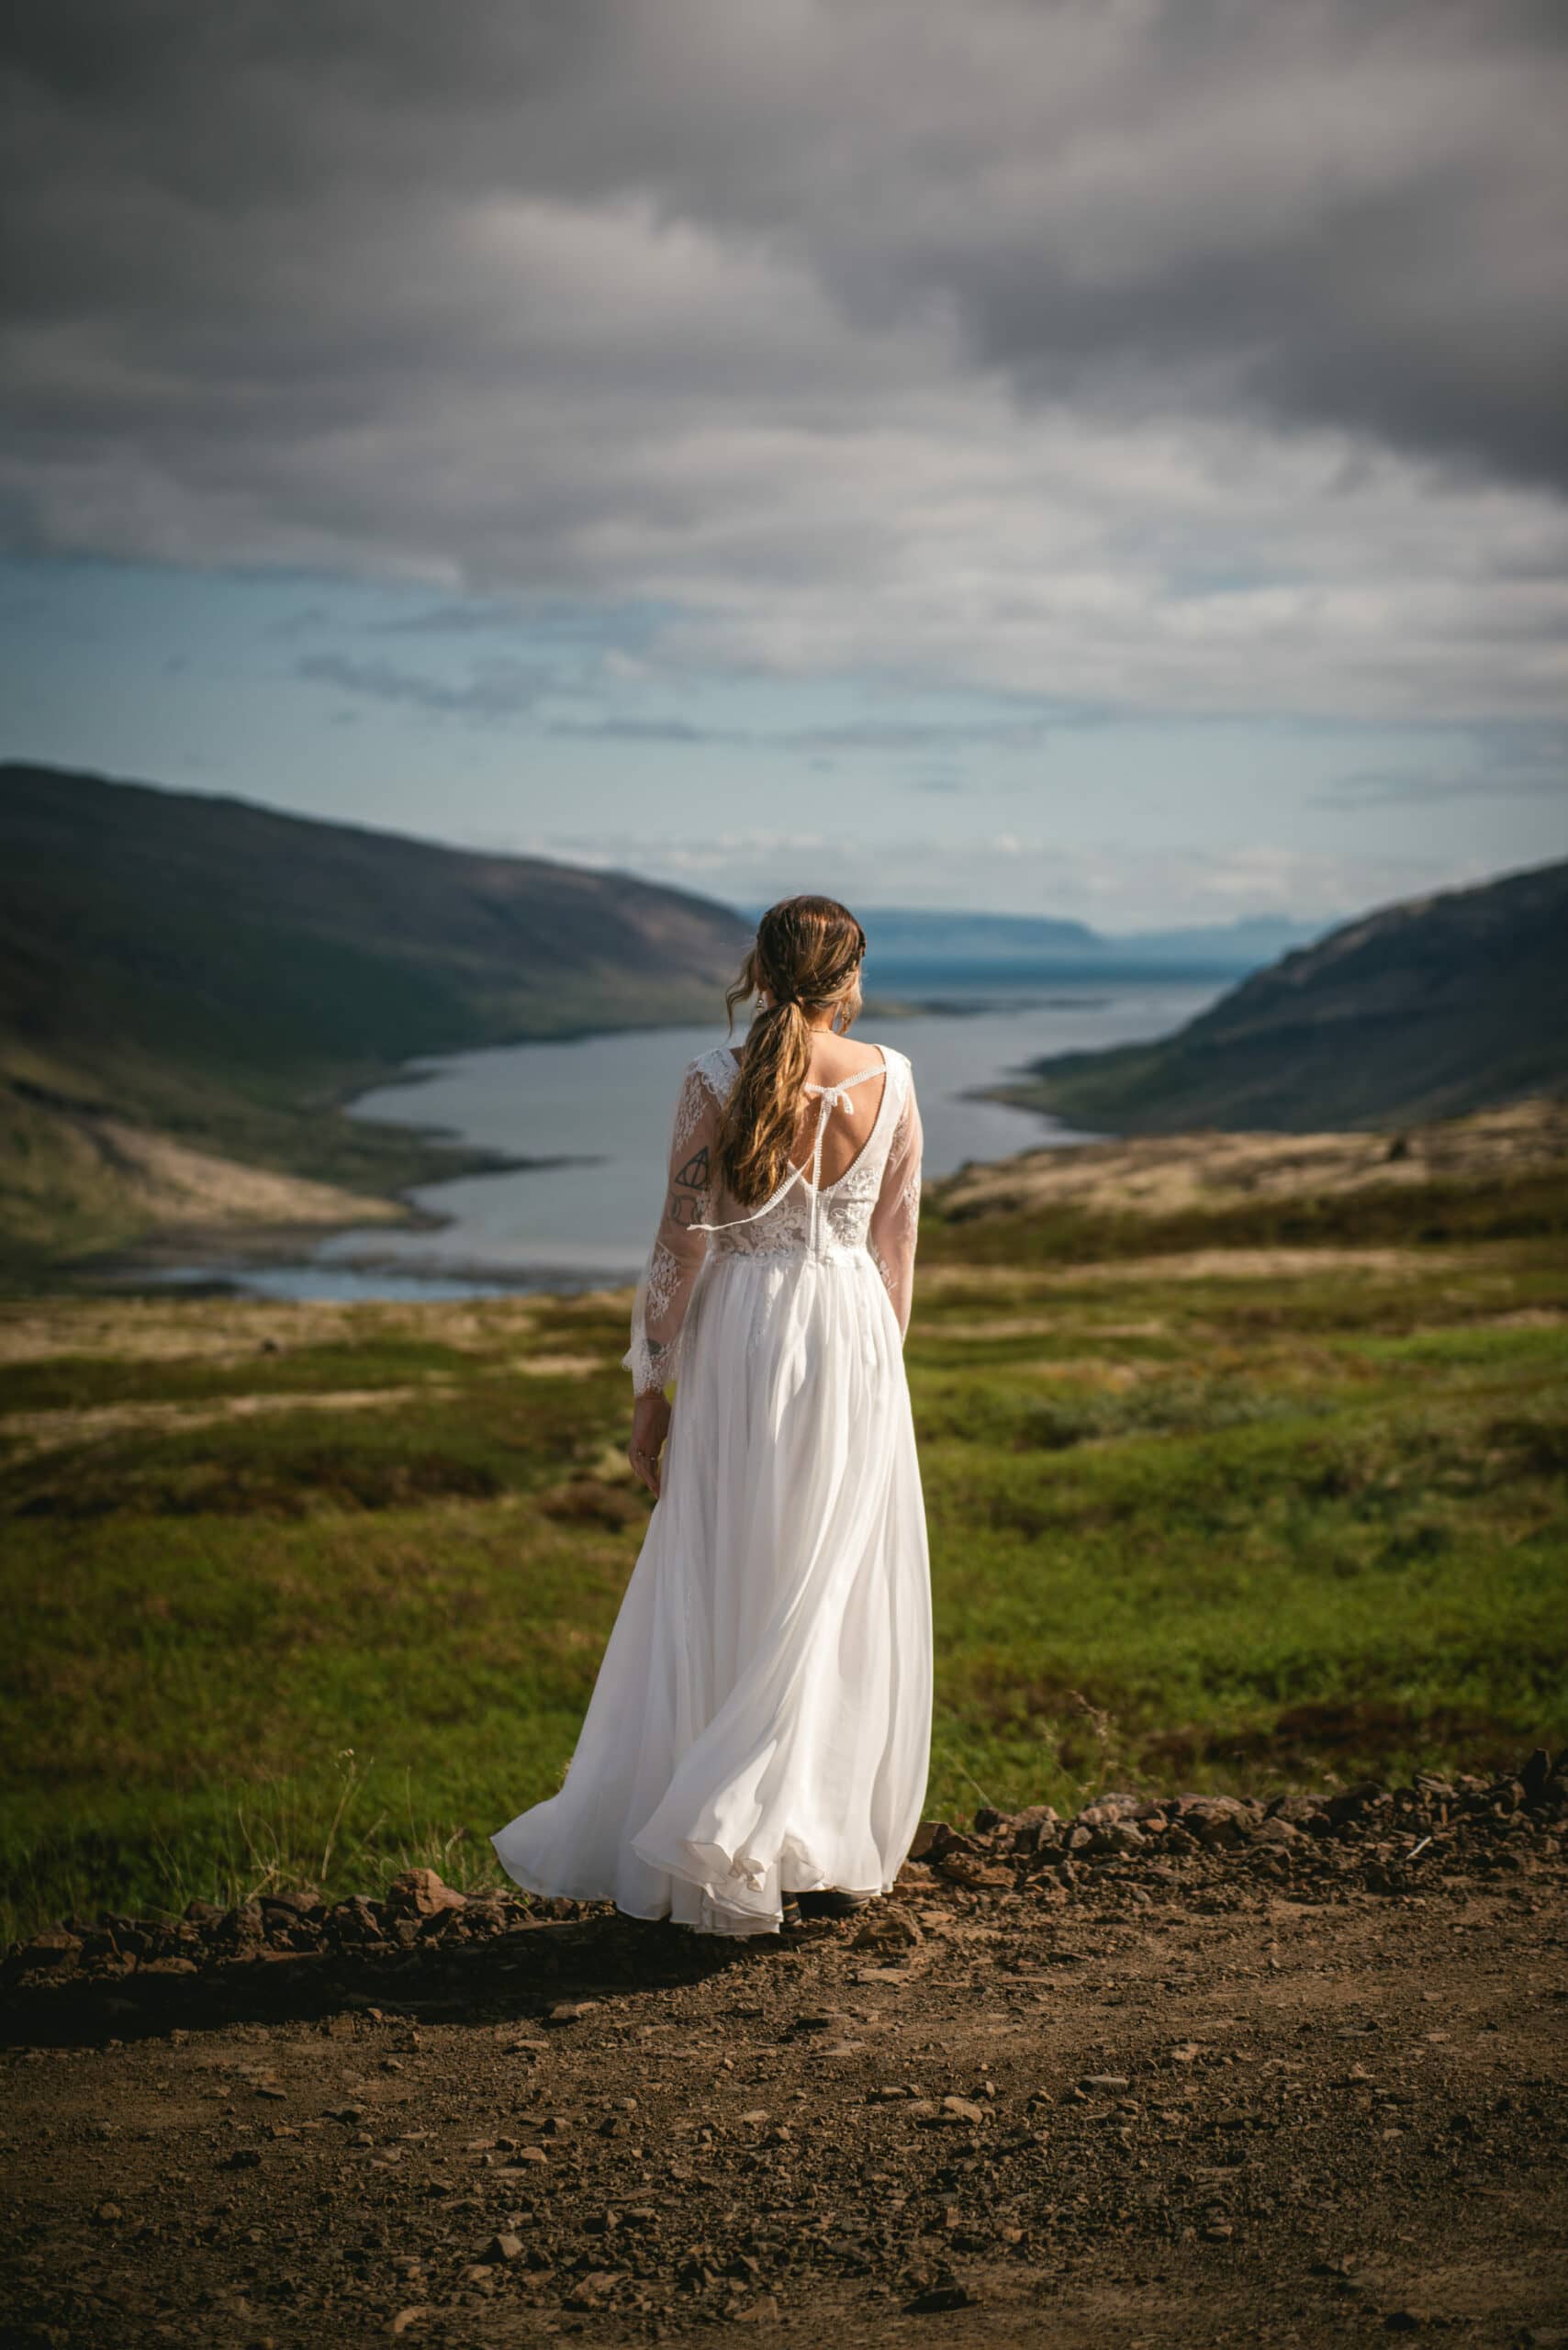 From behind, the bride gazes at the picturesque Westfjords, embodying the anticipation and beauty of her Iceland elopement journey.